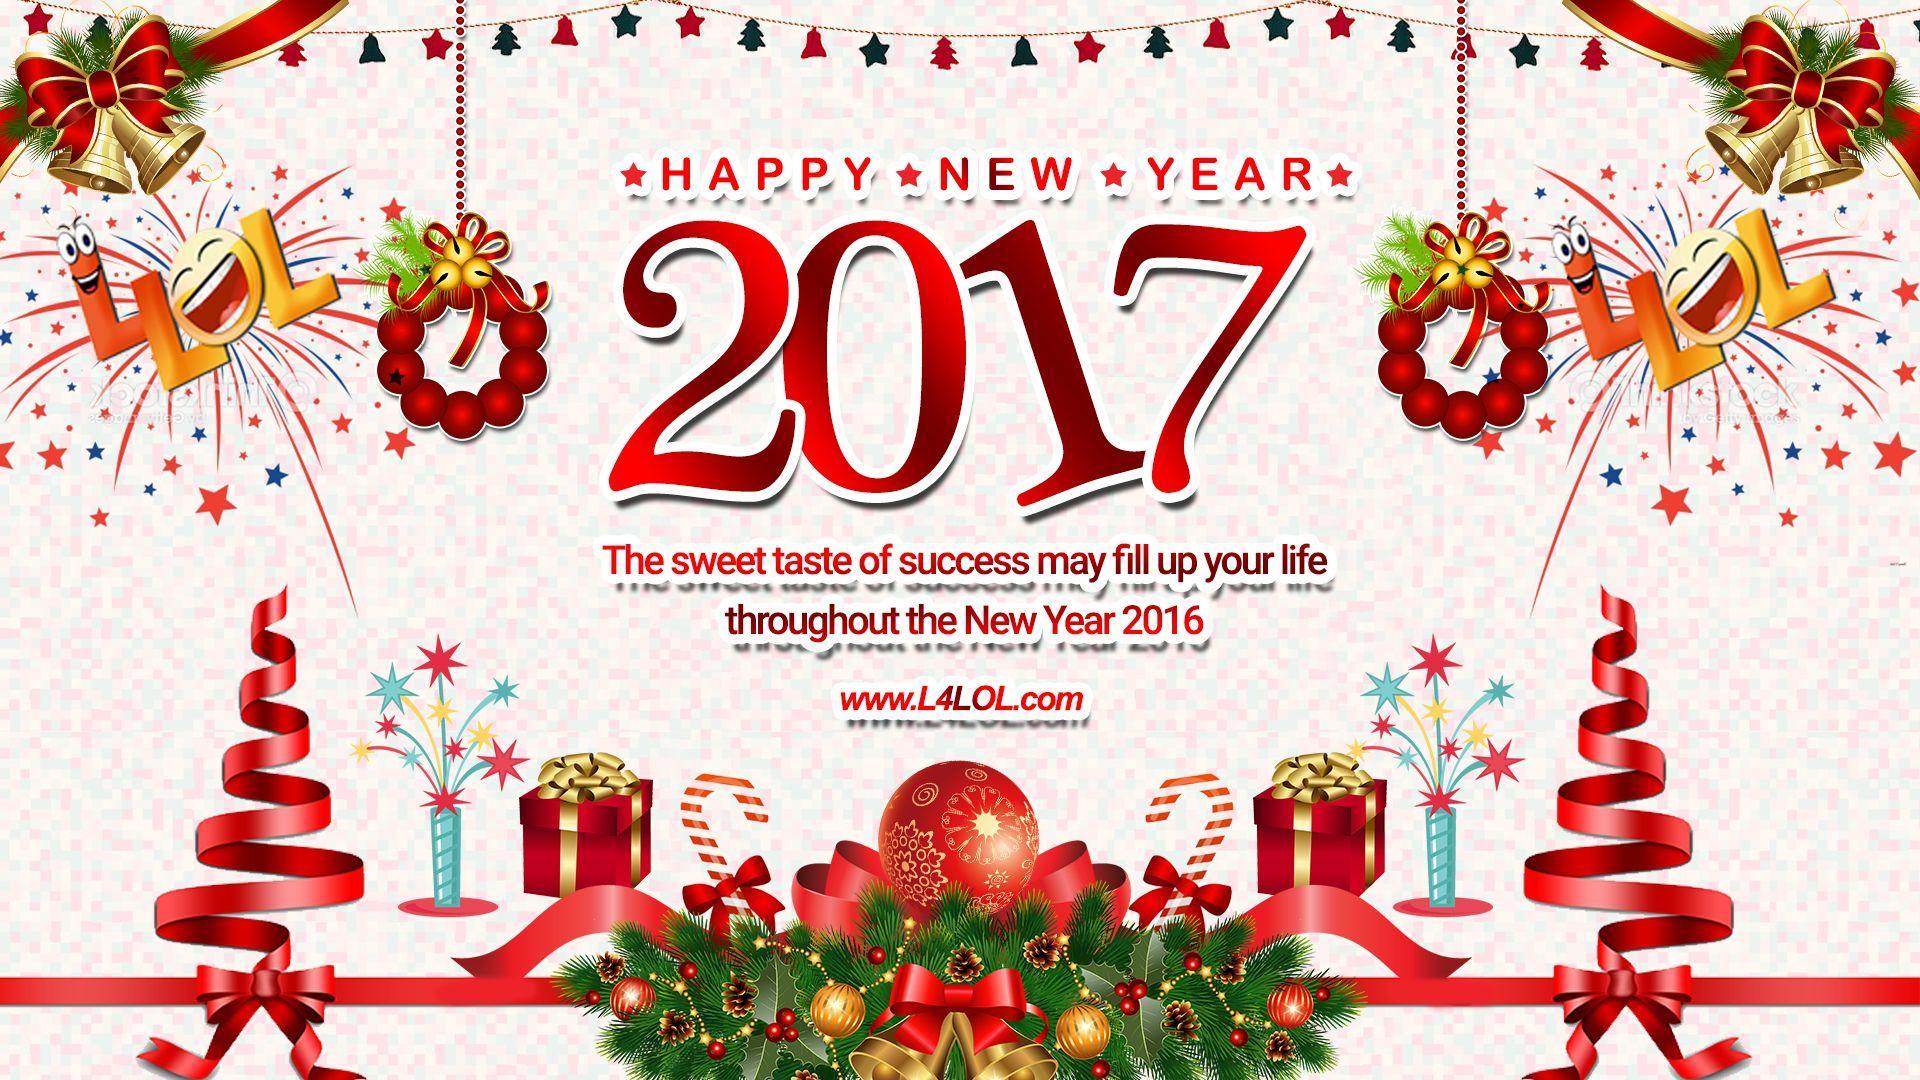 New Year 2017 HD Wallpaper New Year 2017. Happy New Year